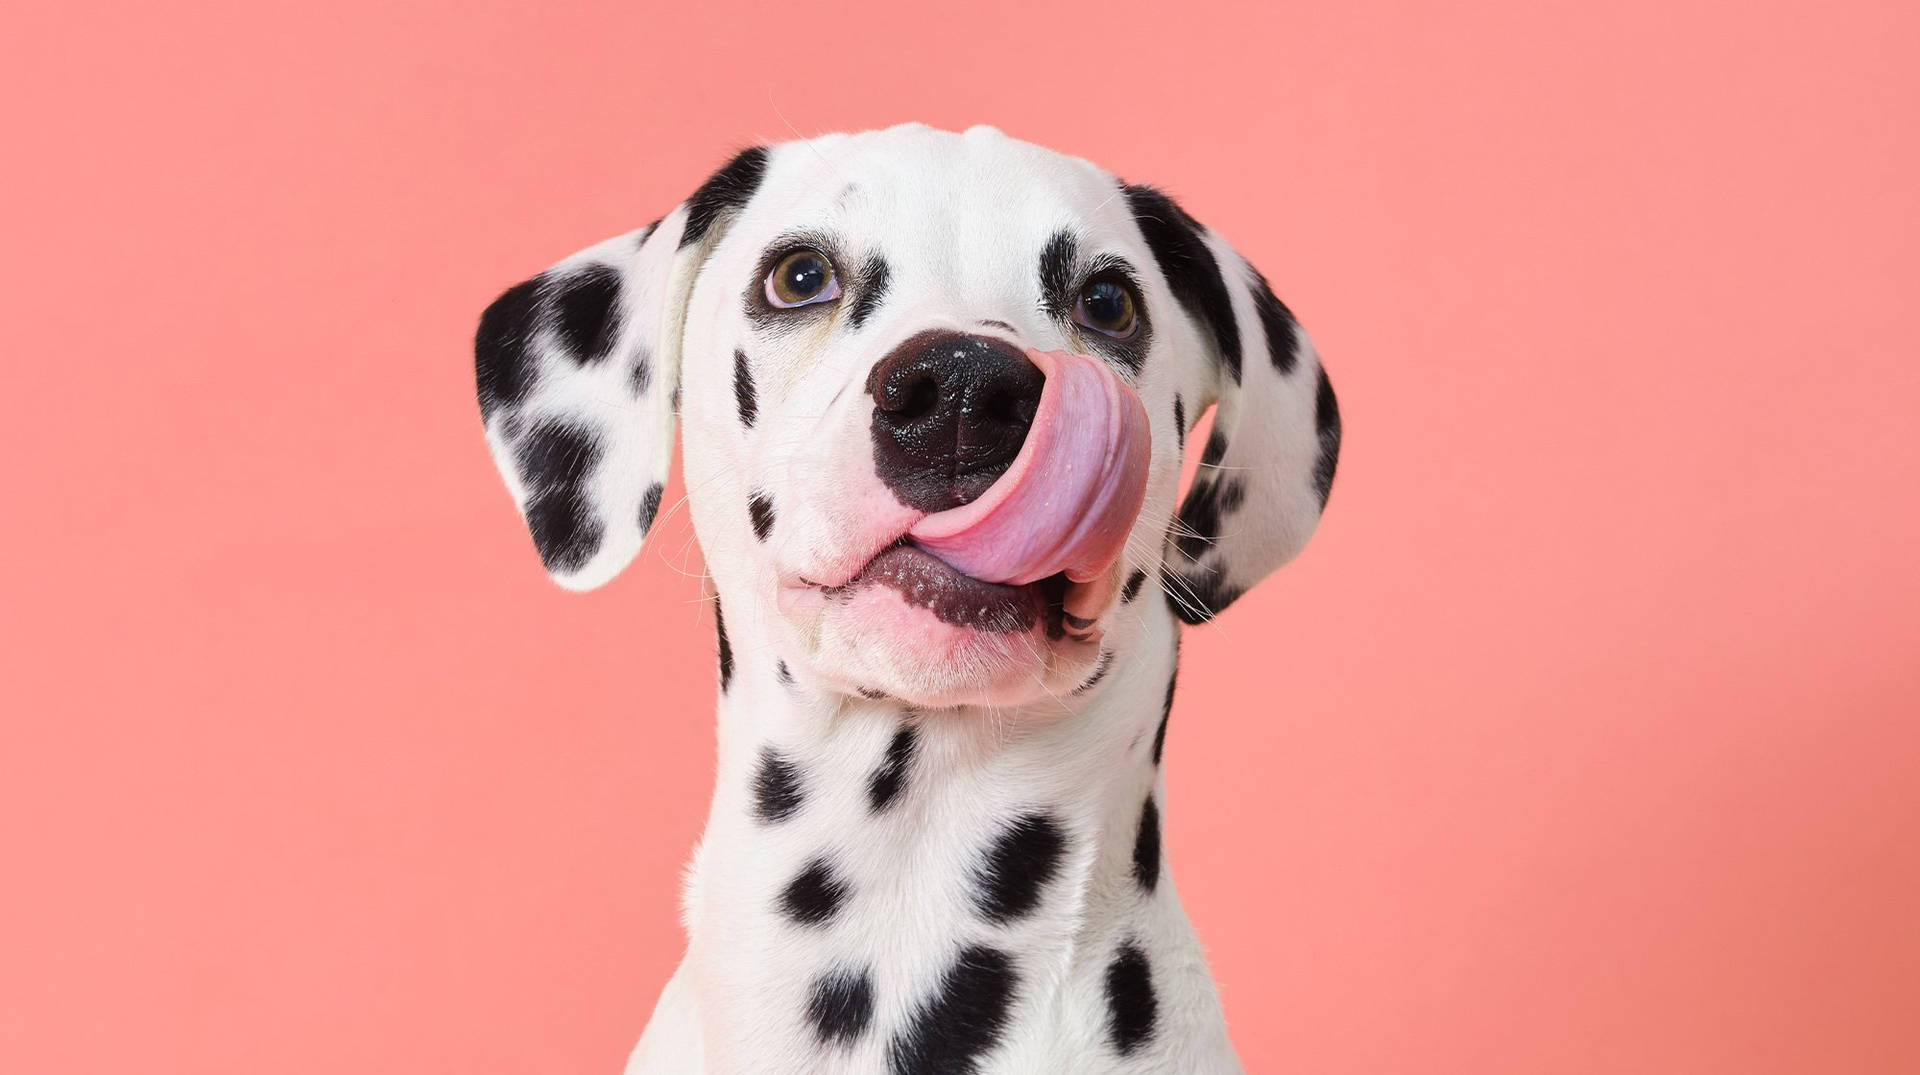 Silly Dalmatian Tongue Out